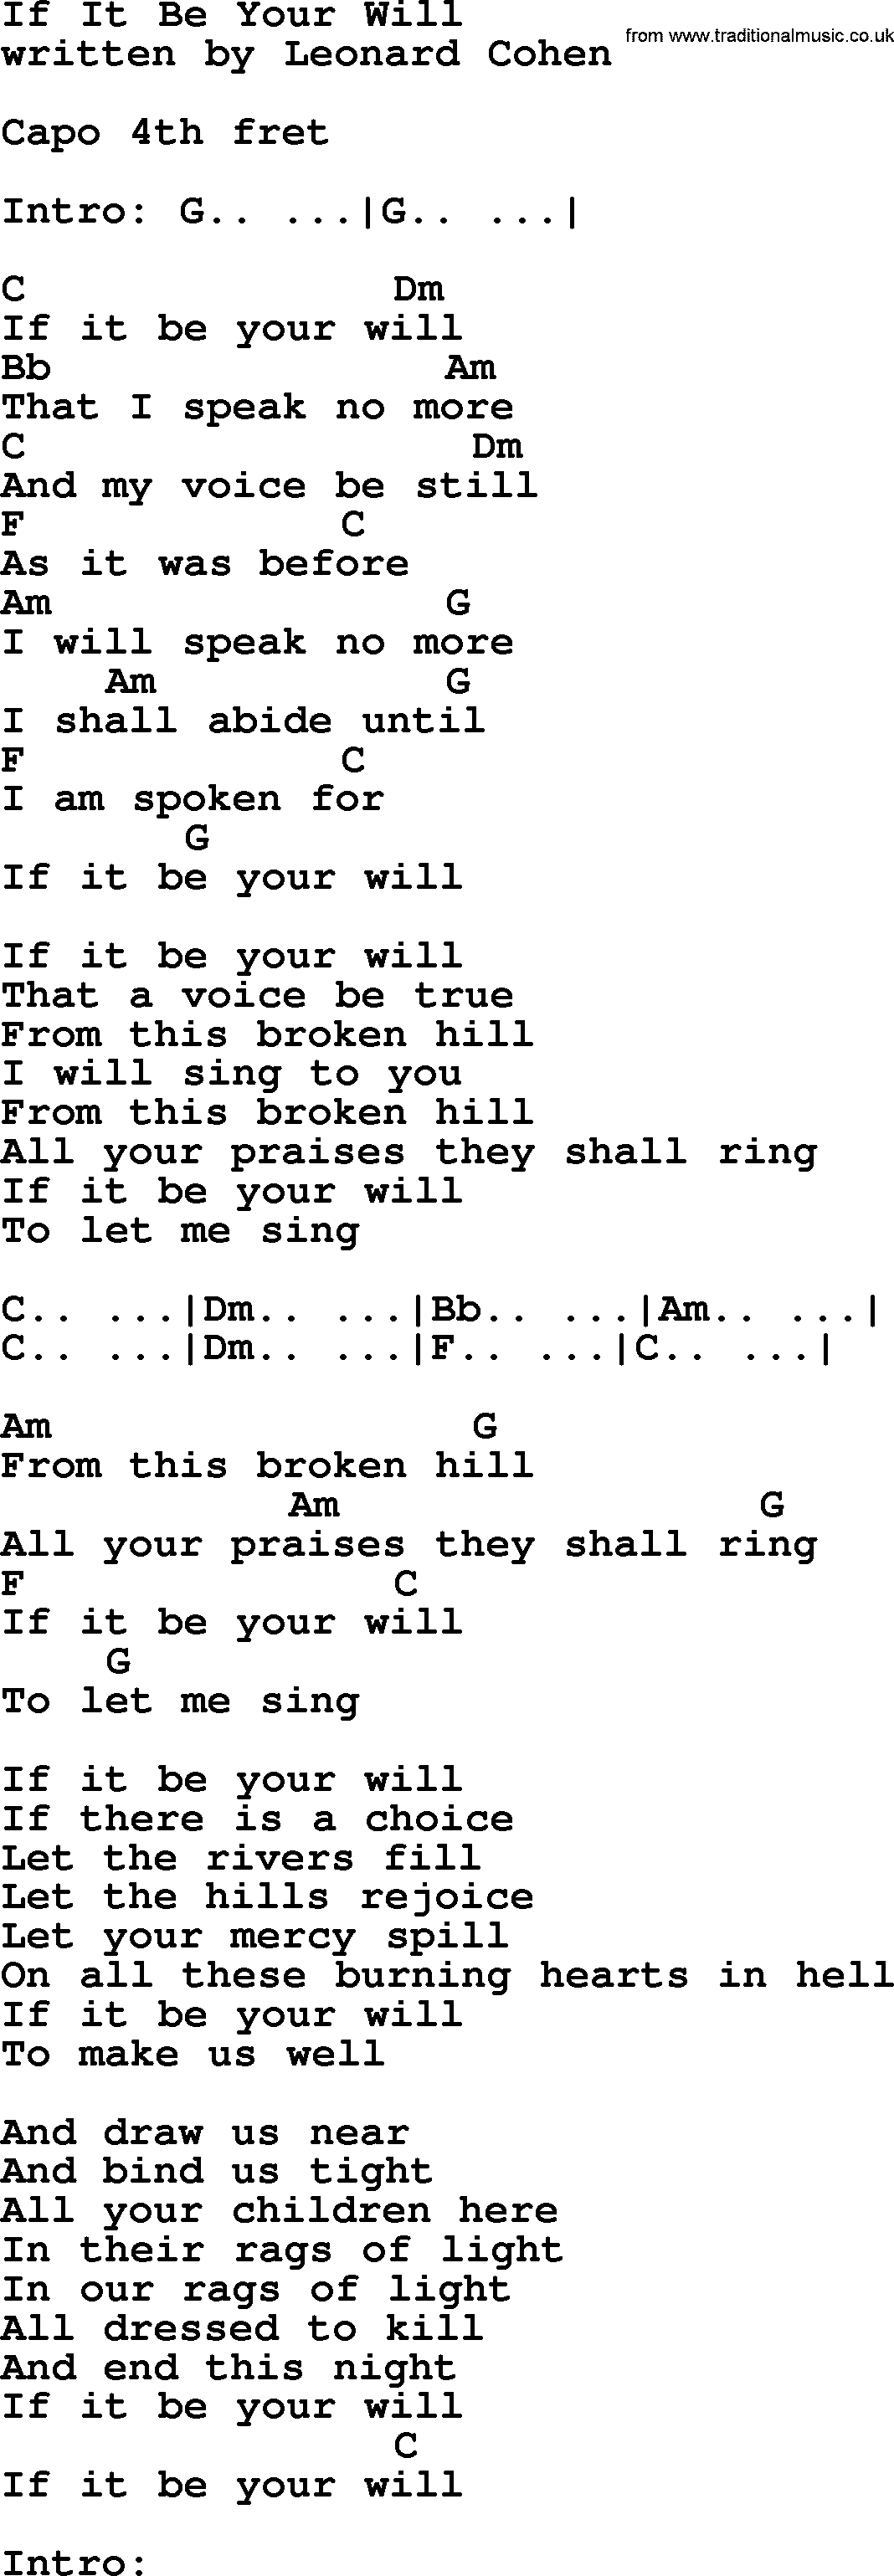 Leonard Cohen song If It Be Your Will, lyrics and chords